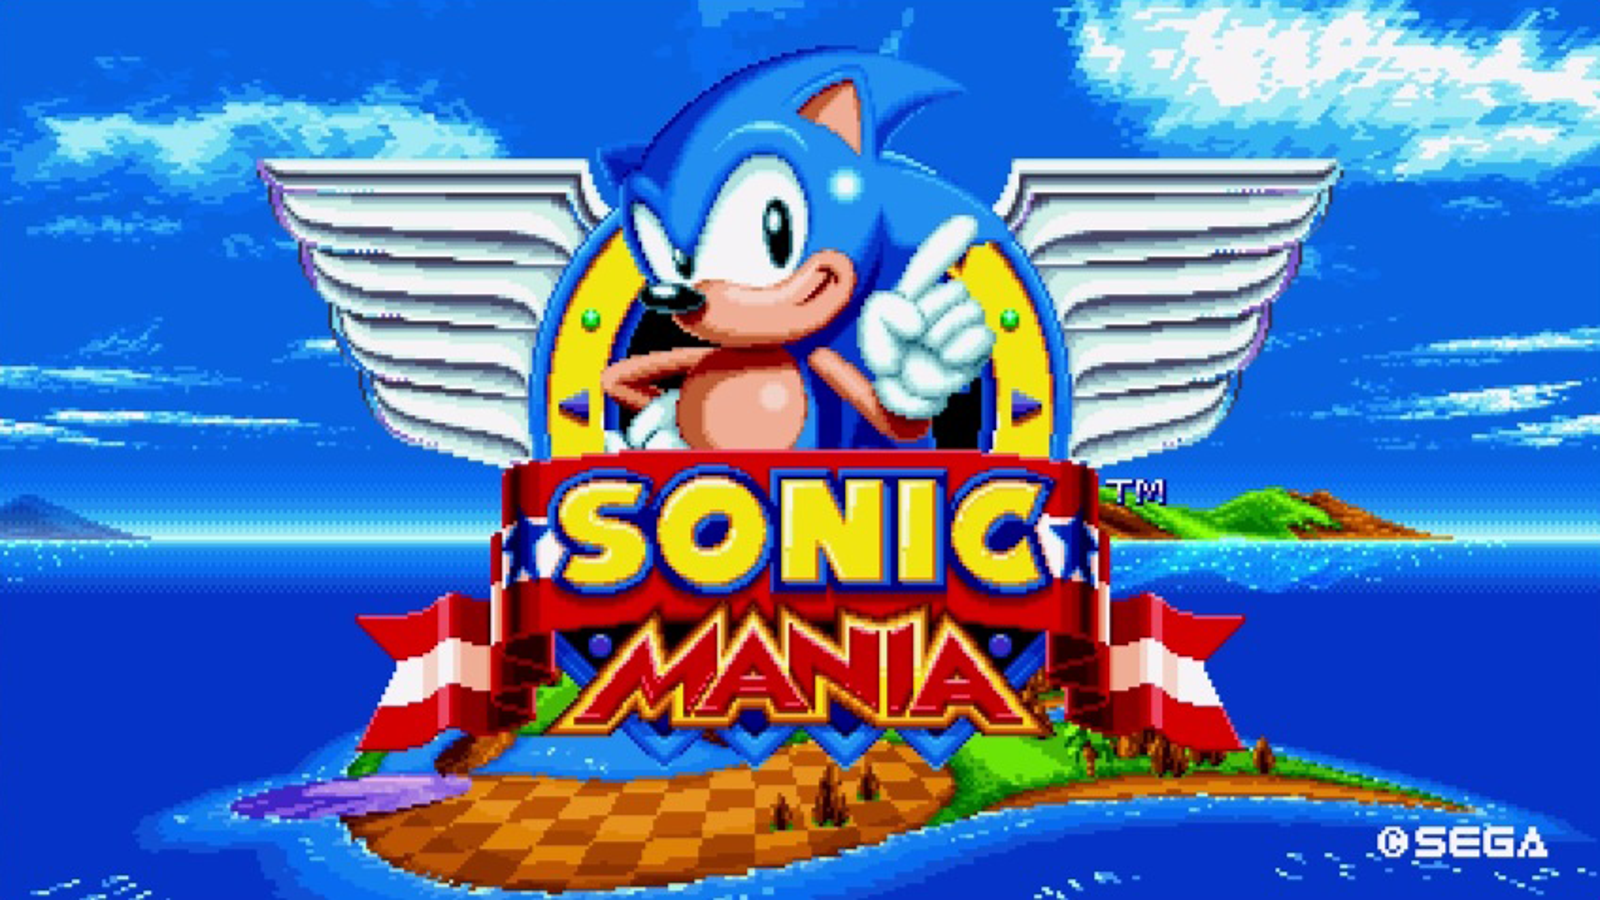 Sonic Mania fans are angry the PC version uses Denuvo DRM - but at least it  can be played offline now